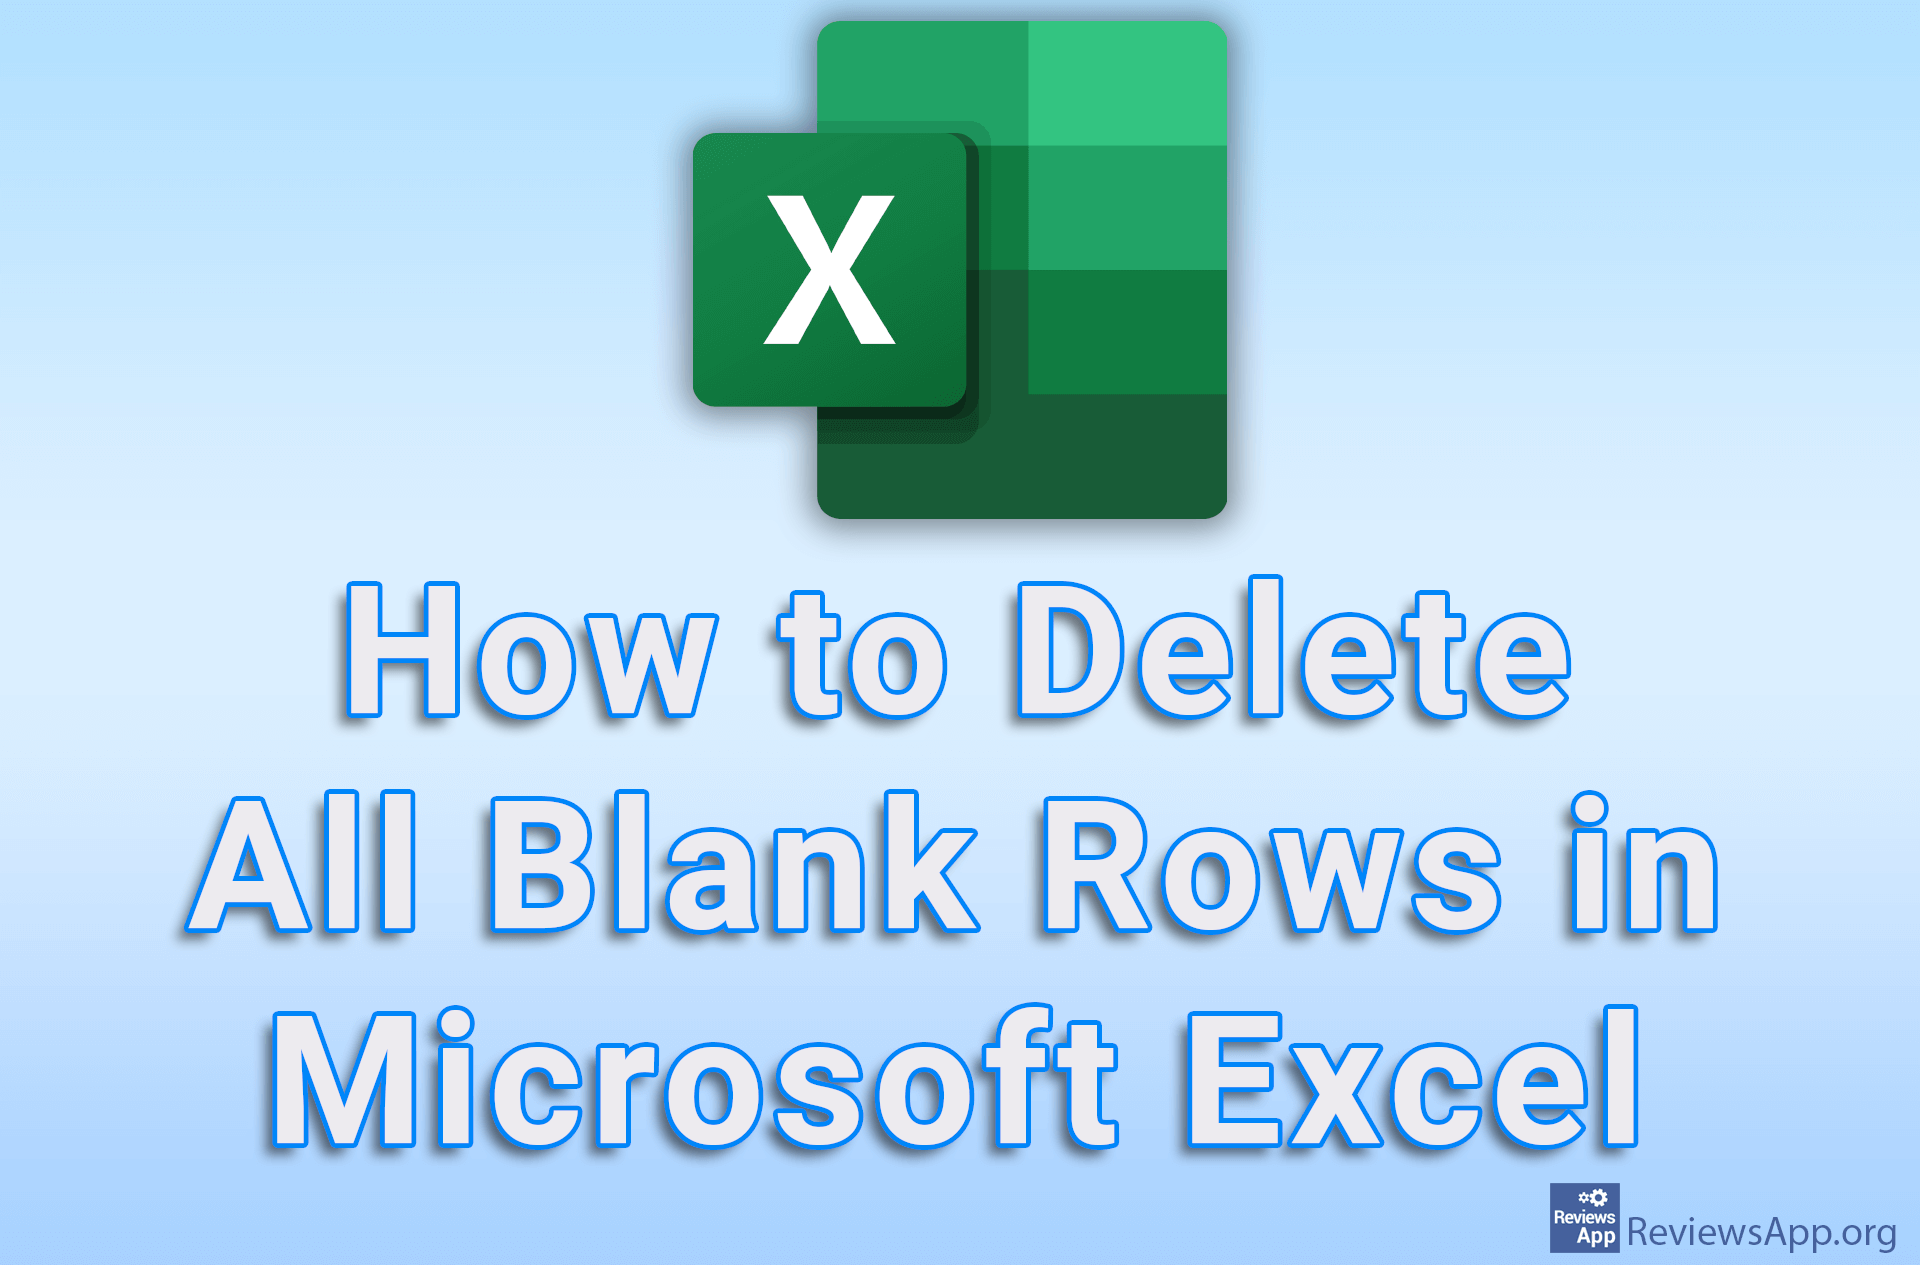 How to Delete All Blank Rows in Microsoft Excel